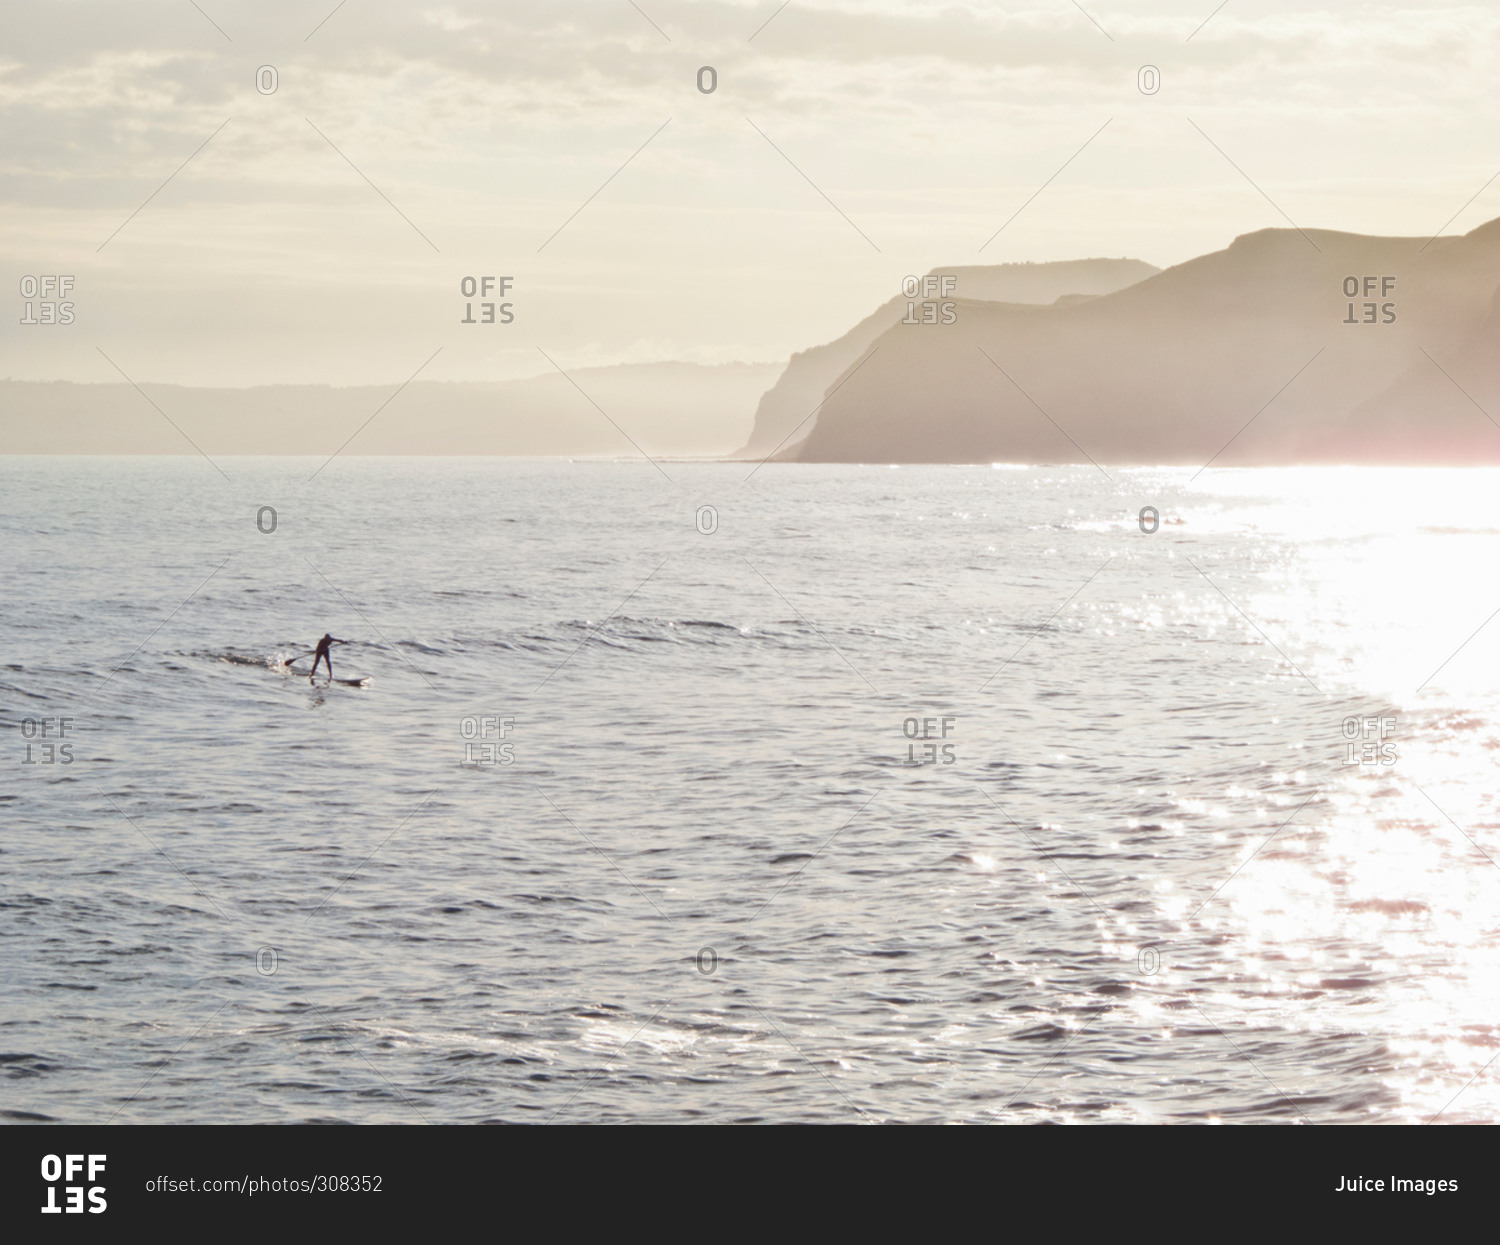 Man riding a wave whilst paddle surfing in picturesque location